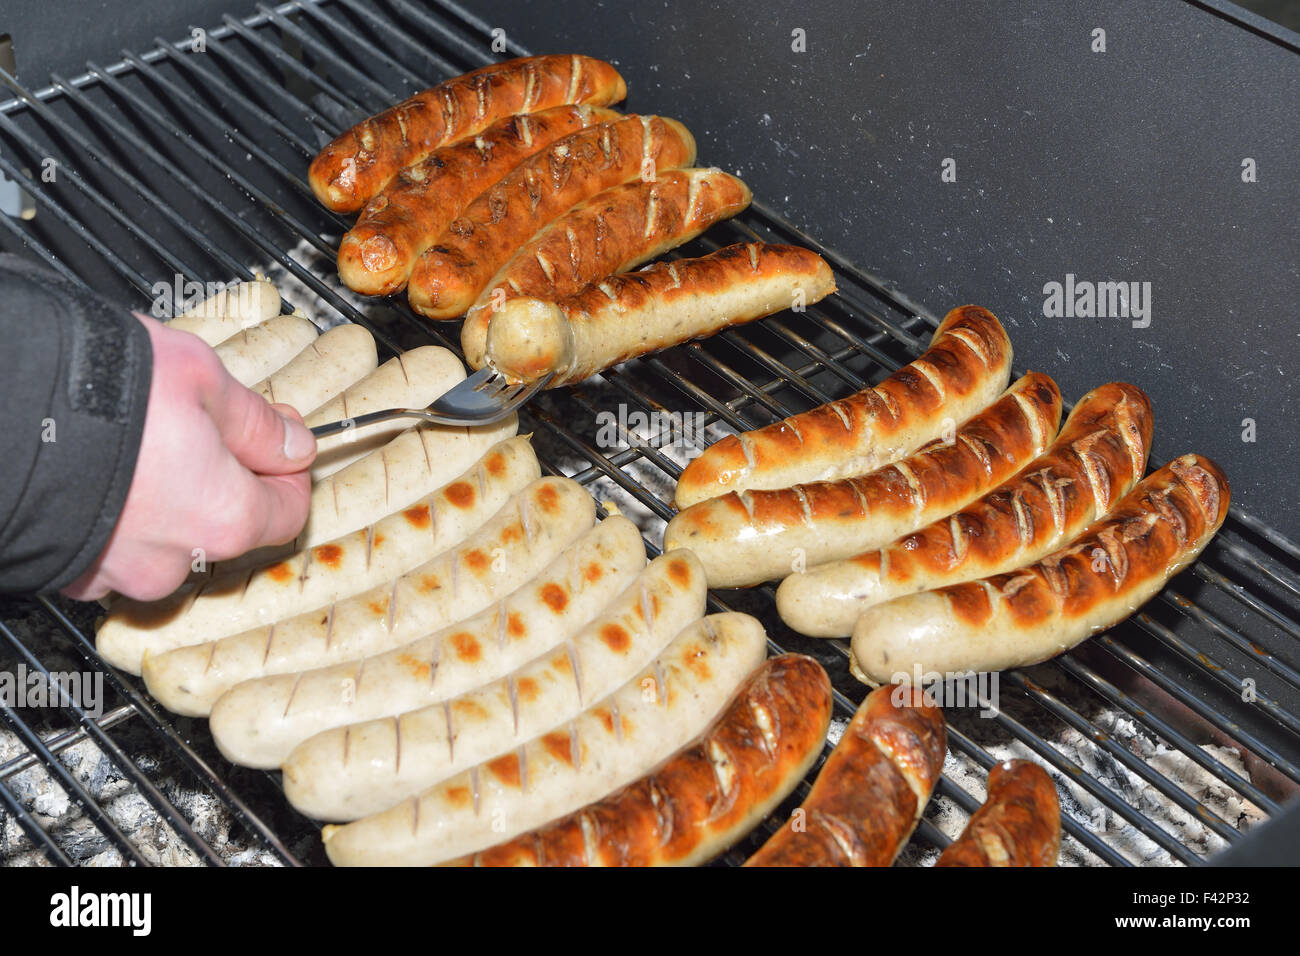 Grilled sausages Stock Photo